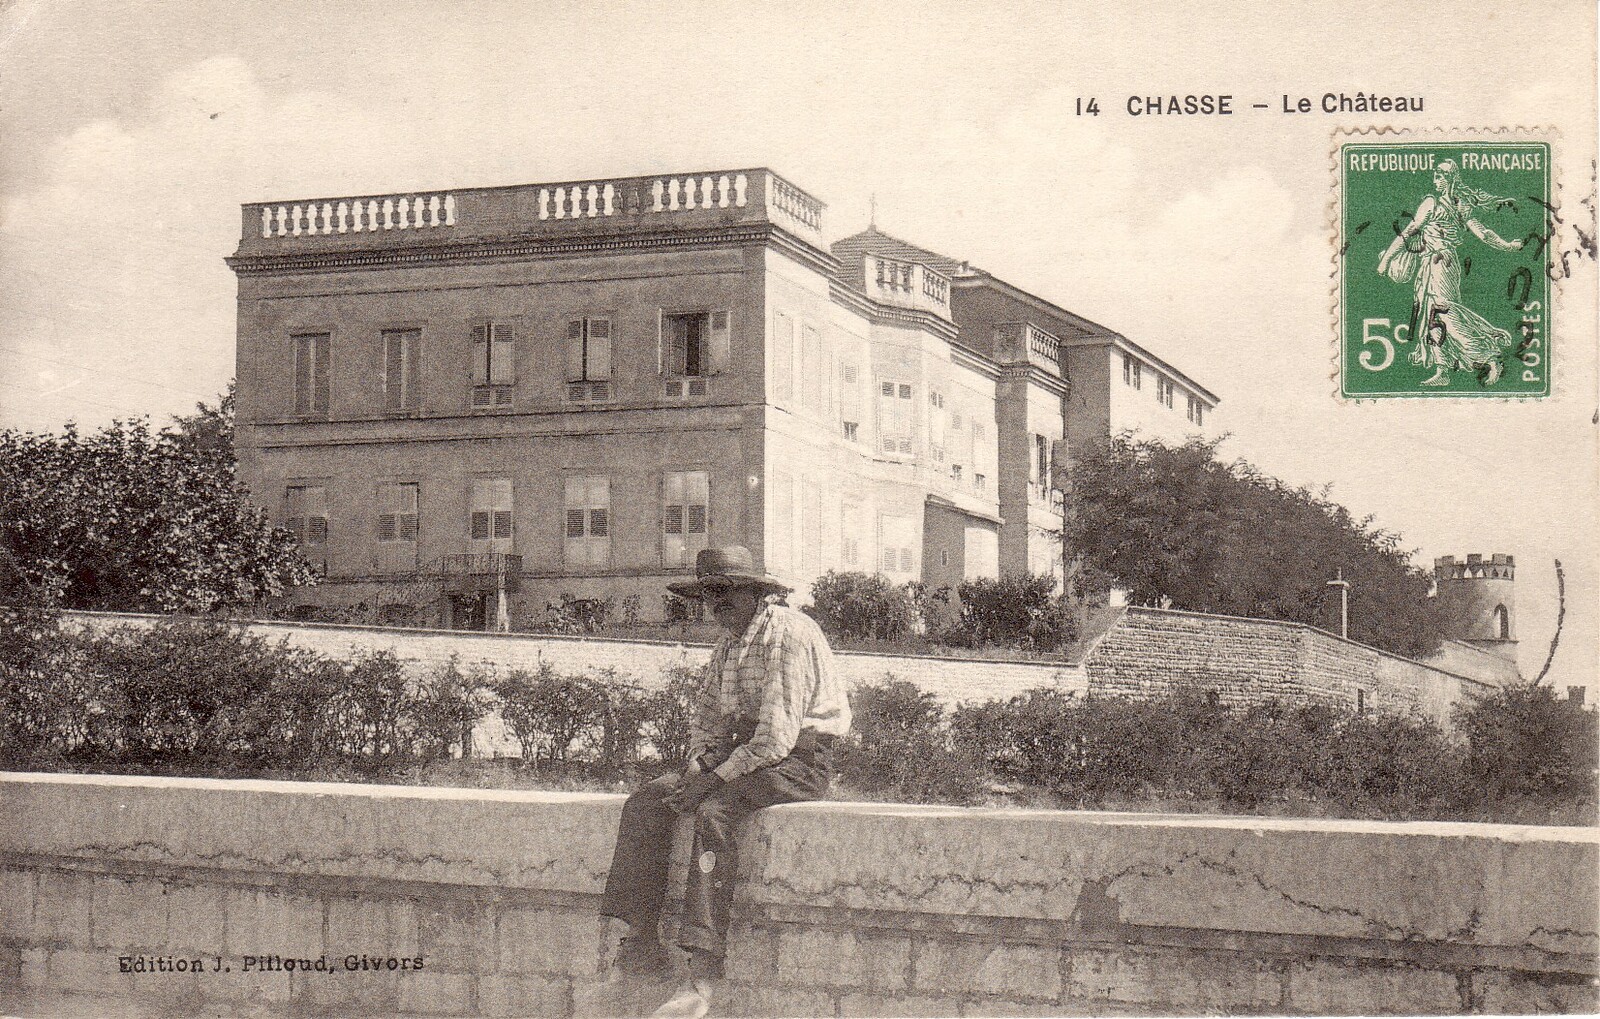 14_chasse_-_le_chateau.jpg